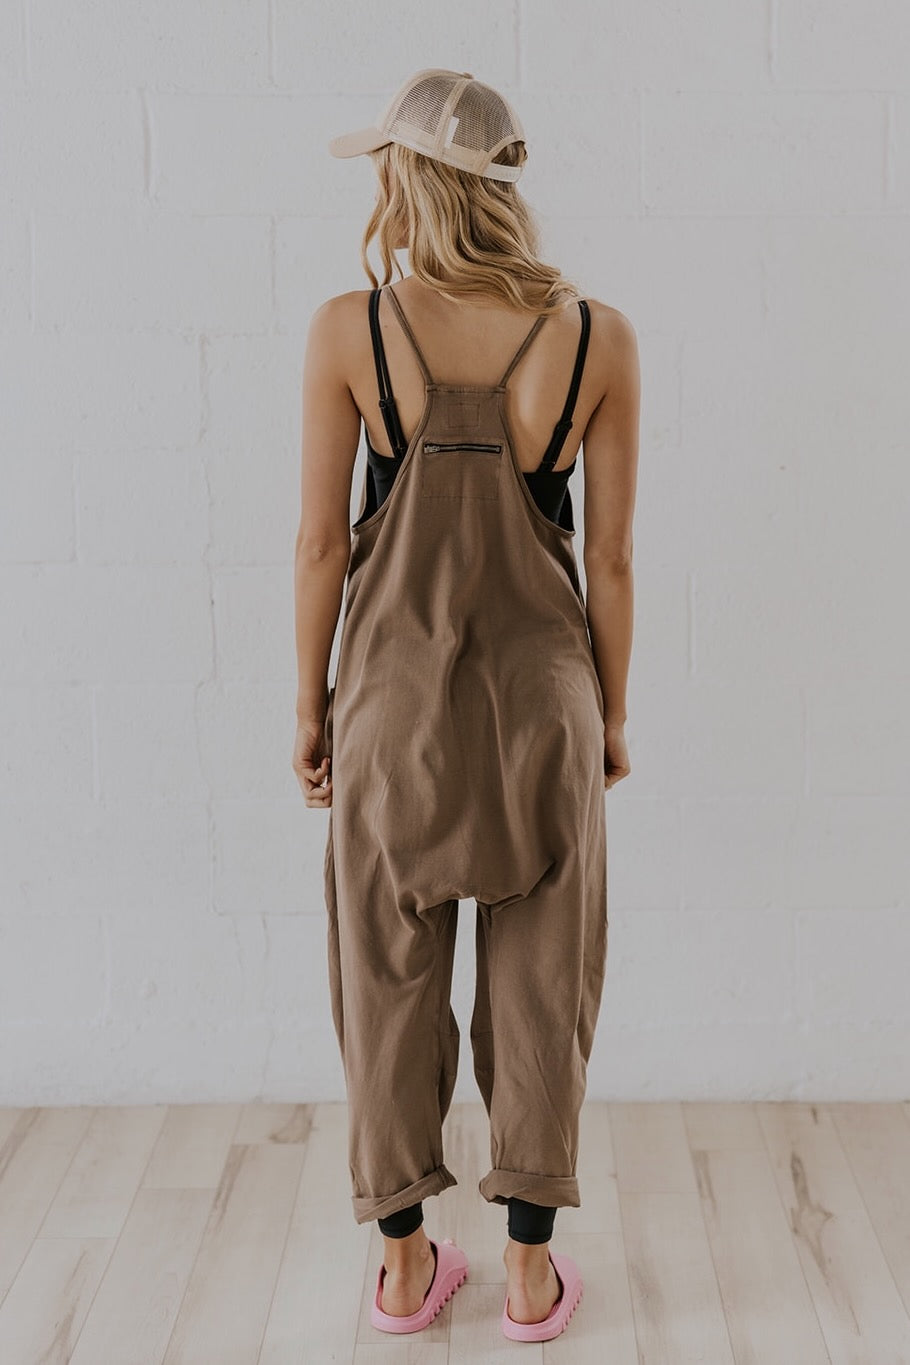 a woman in overalls looking back